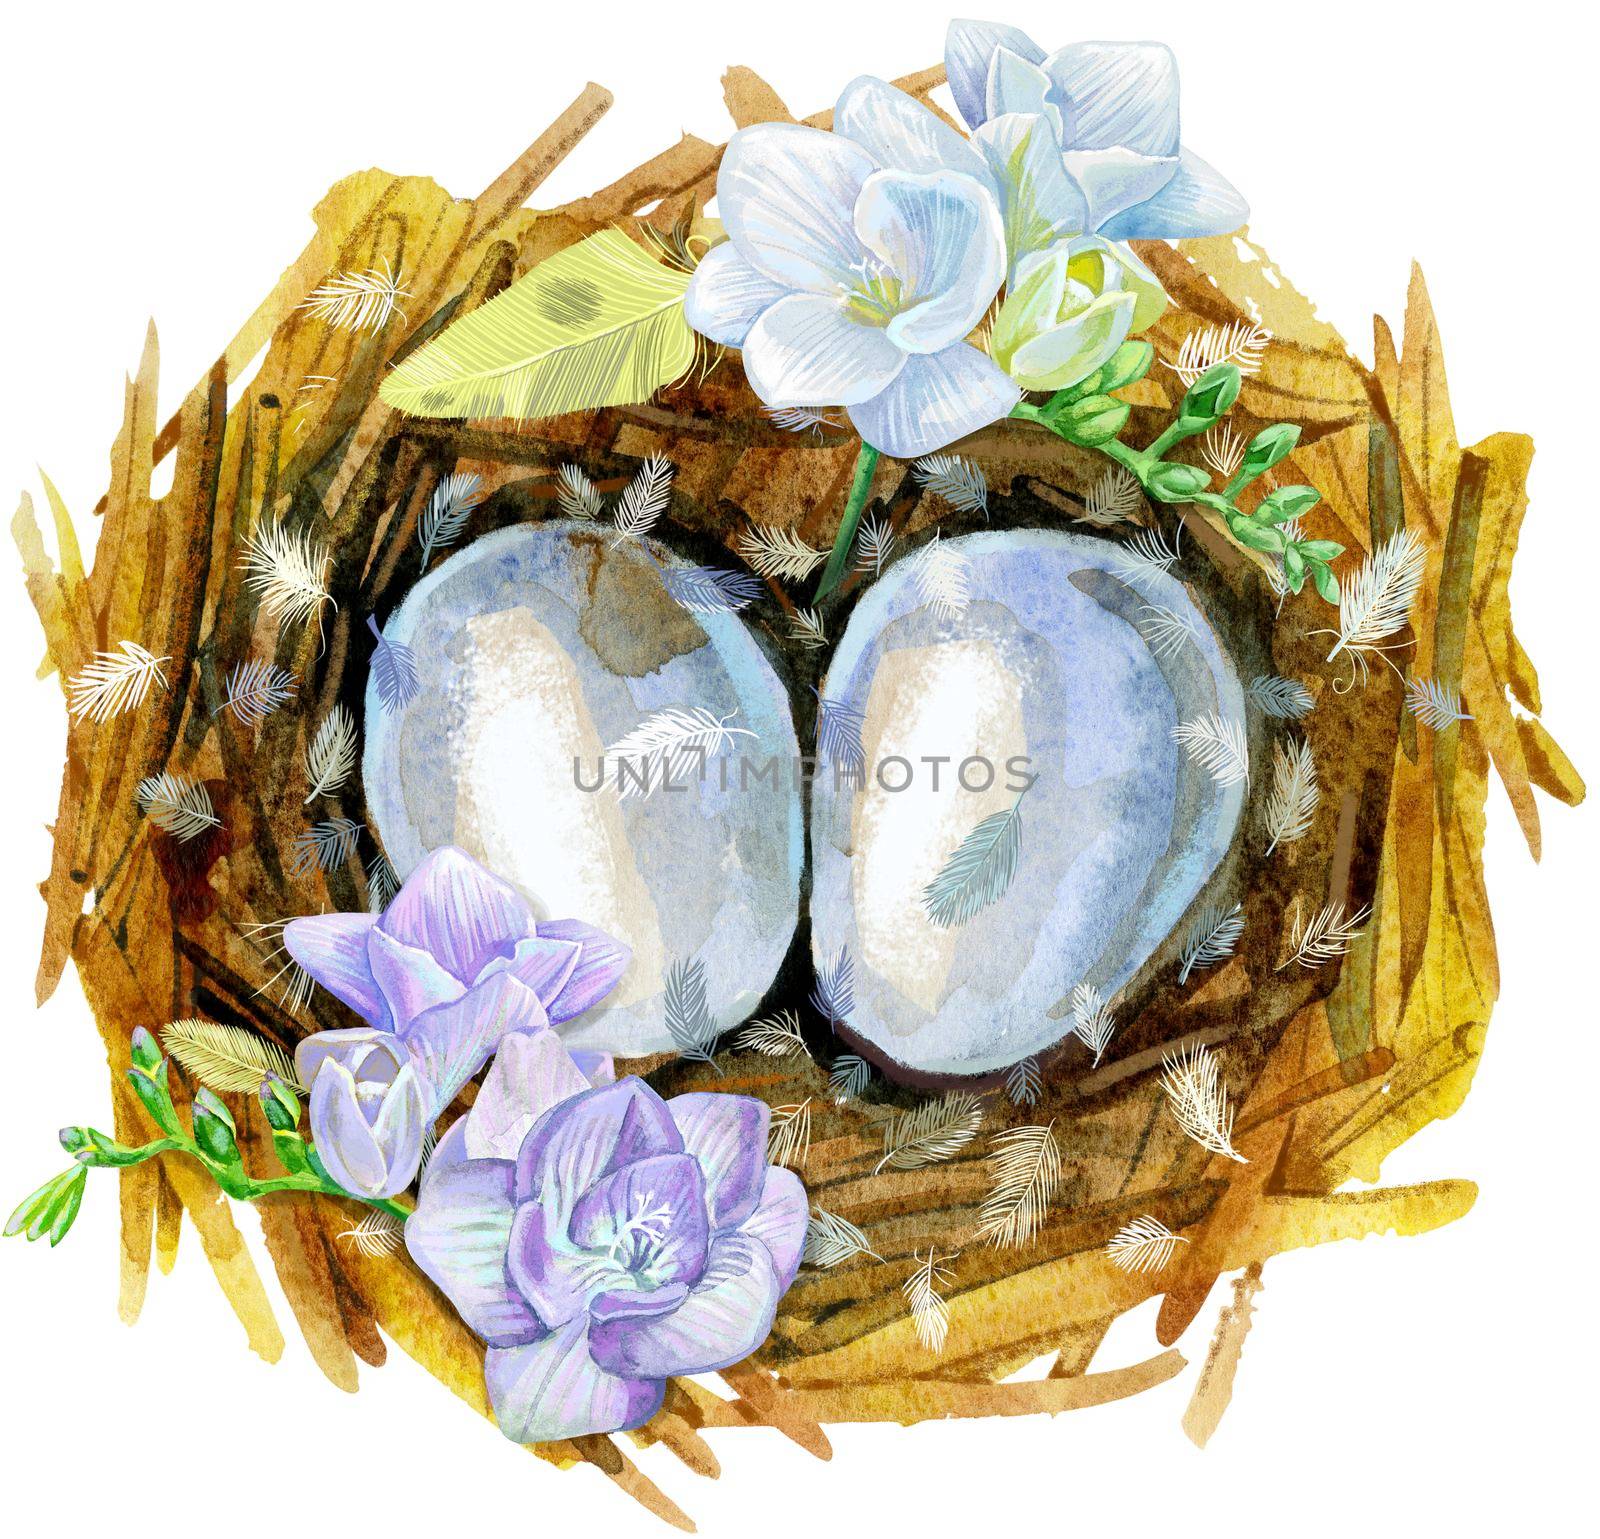 Nest with eggs and freesia. Painted with watercolors on white background. Spring decoration. Decorating for Easter.